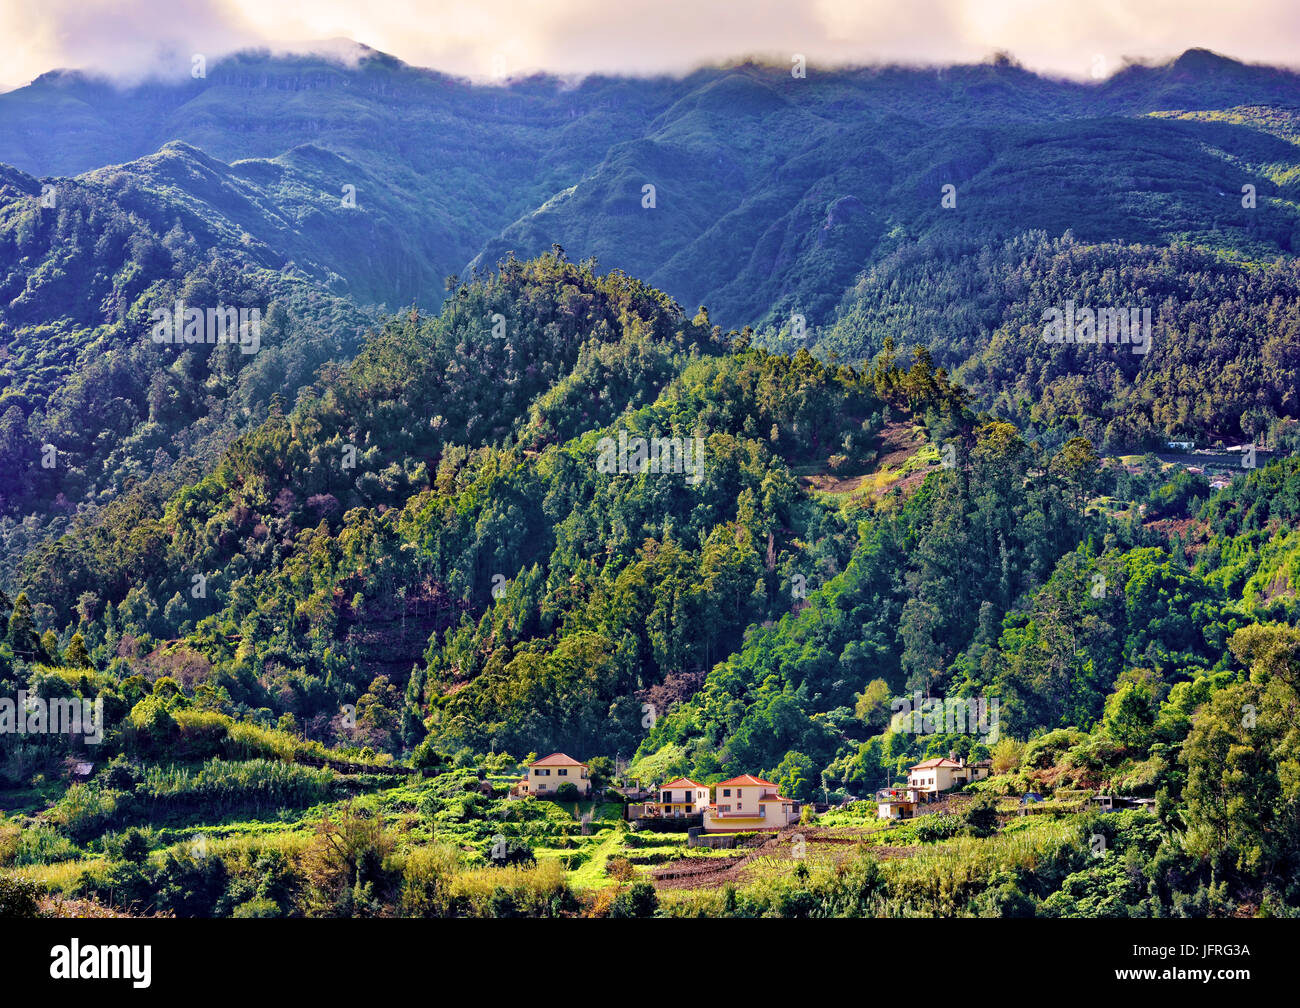 A view of the tree-clad mountainous landscape  of Madeira, Portugal Stock Photo